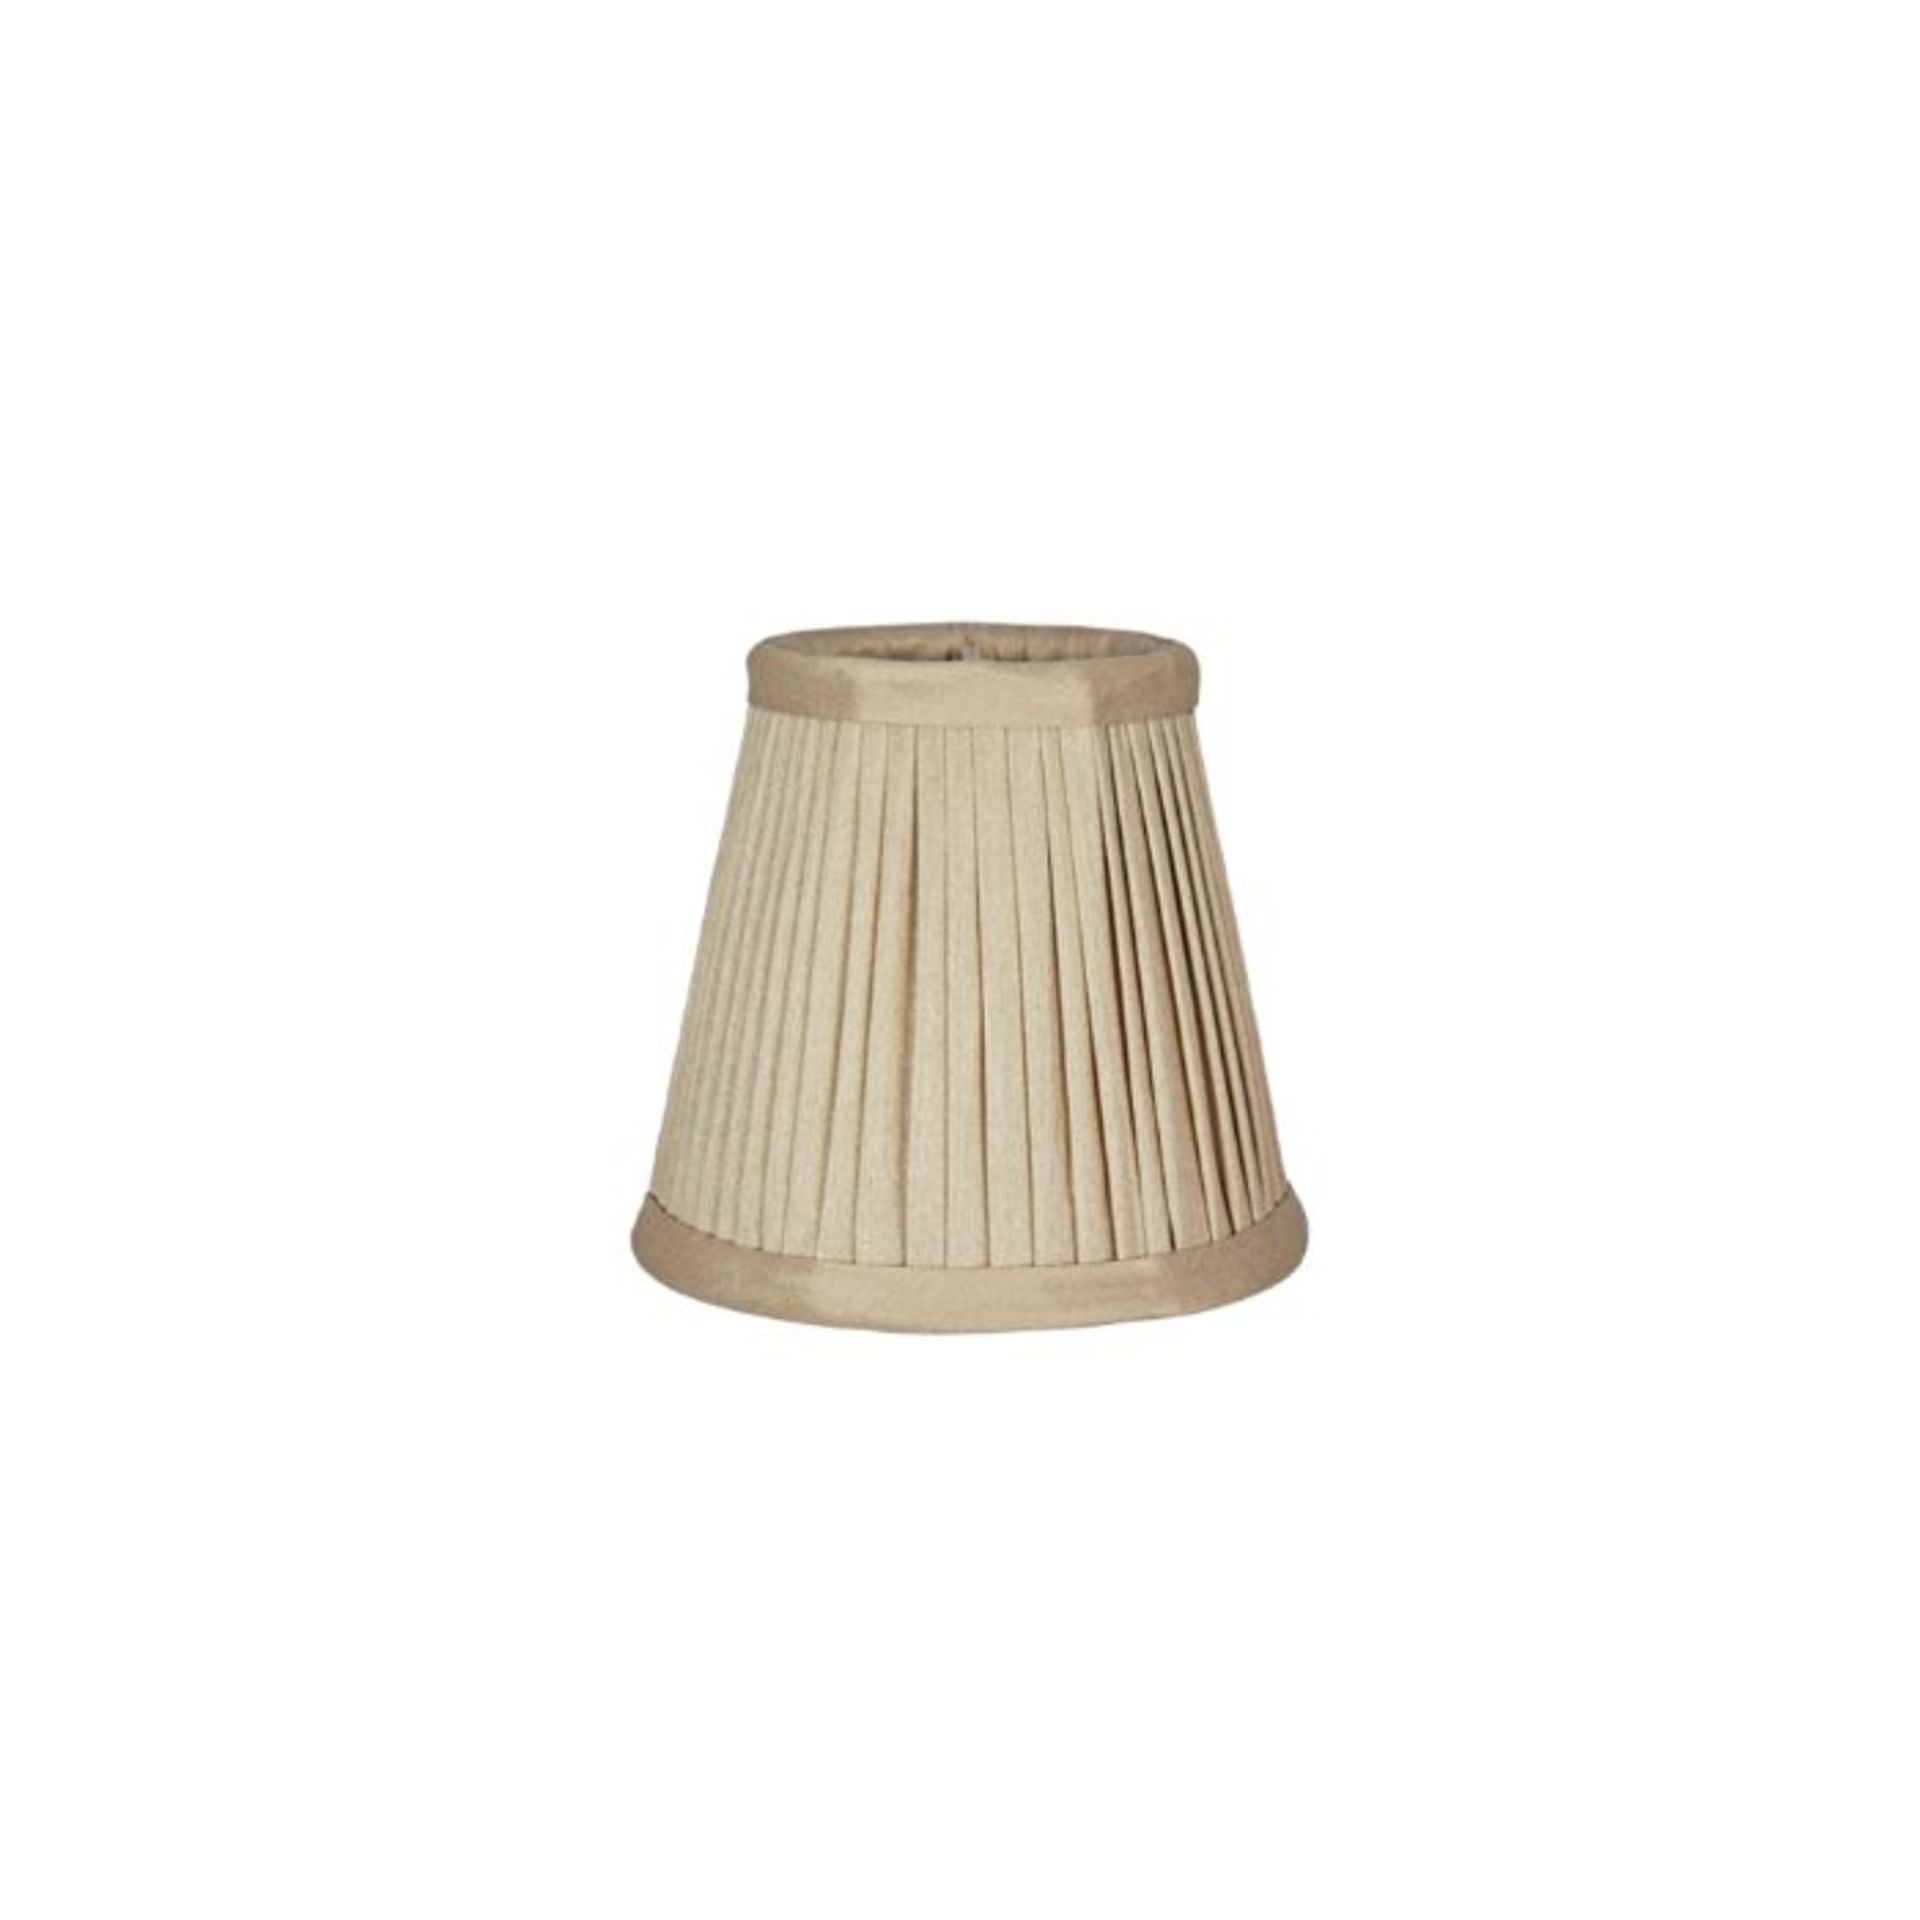 Set of 4 Gold Shades Small For Bamboo Lantern (10cm) (SHADES ONLY) 701099, 701100 (460/11 -701266)